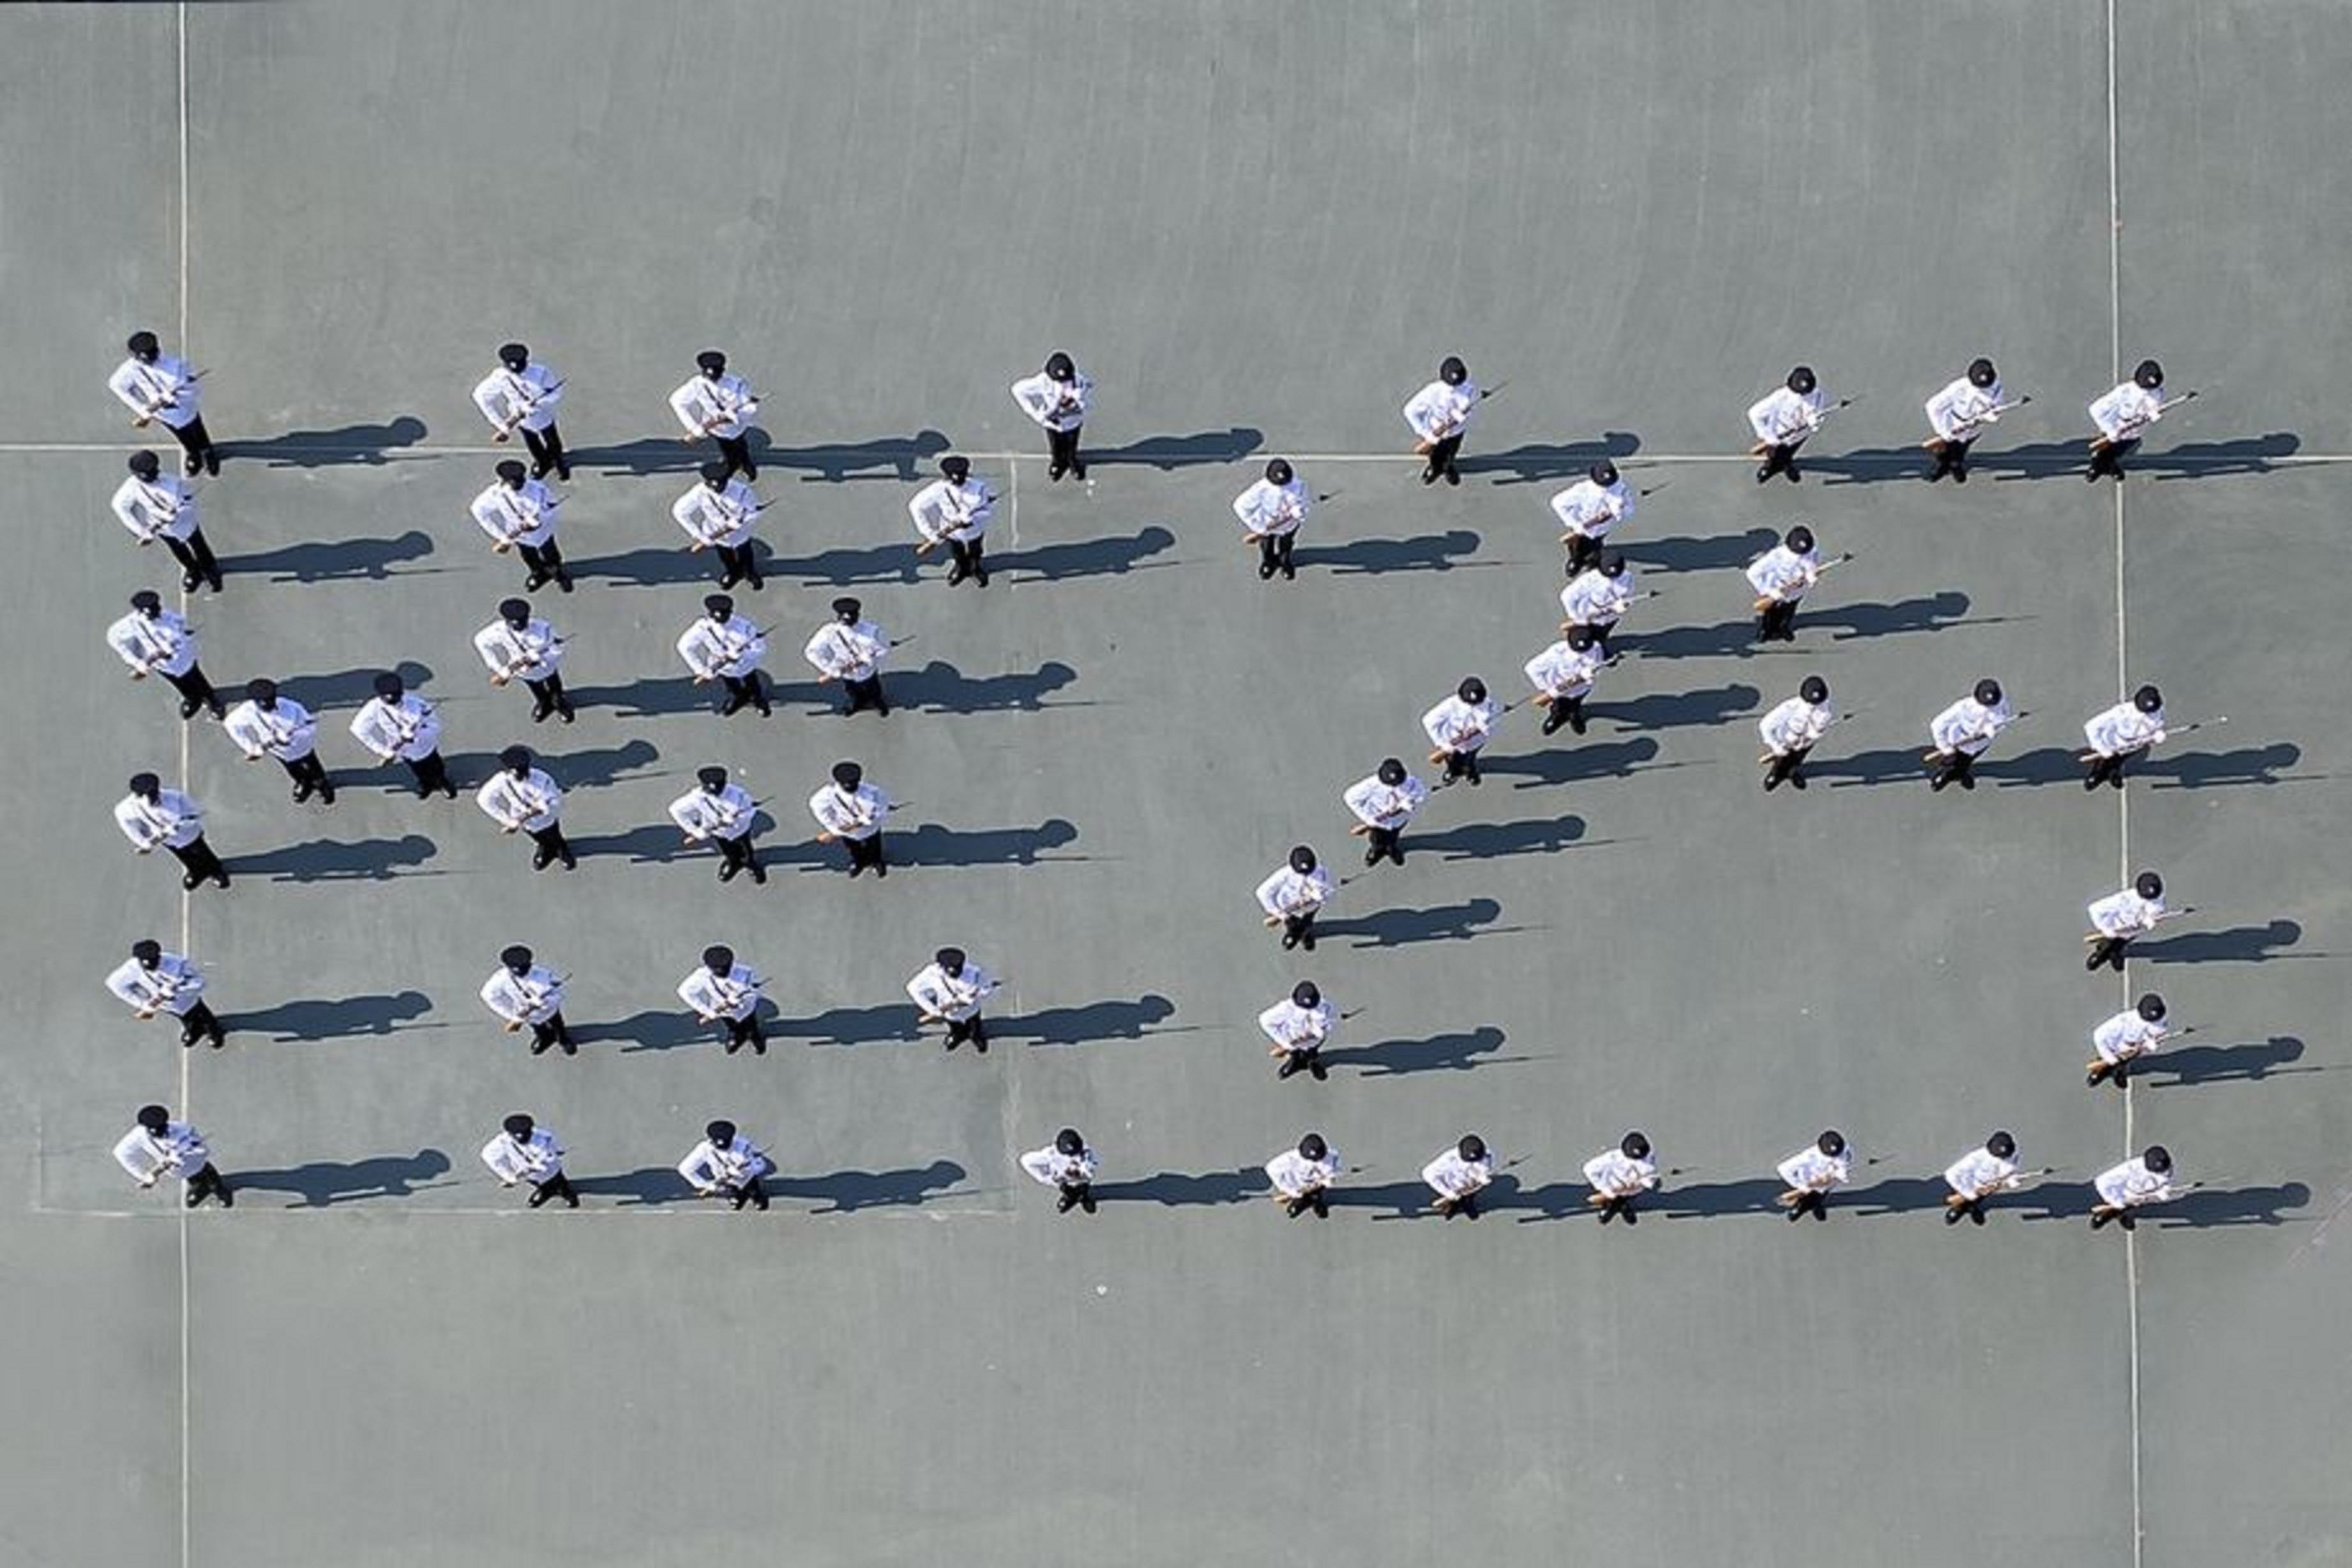 The Immigration Service Institute of Training and Development held an Open Day today (October 29). Photo shows the Departmental Contingent demonstrating the pattern of "HK25" to celebrate the 25th anniversary of the establishment of the Hong Kong Special Administrative Region.